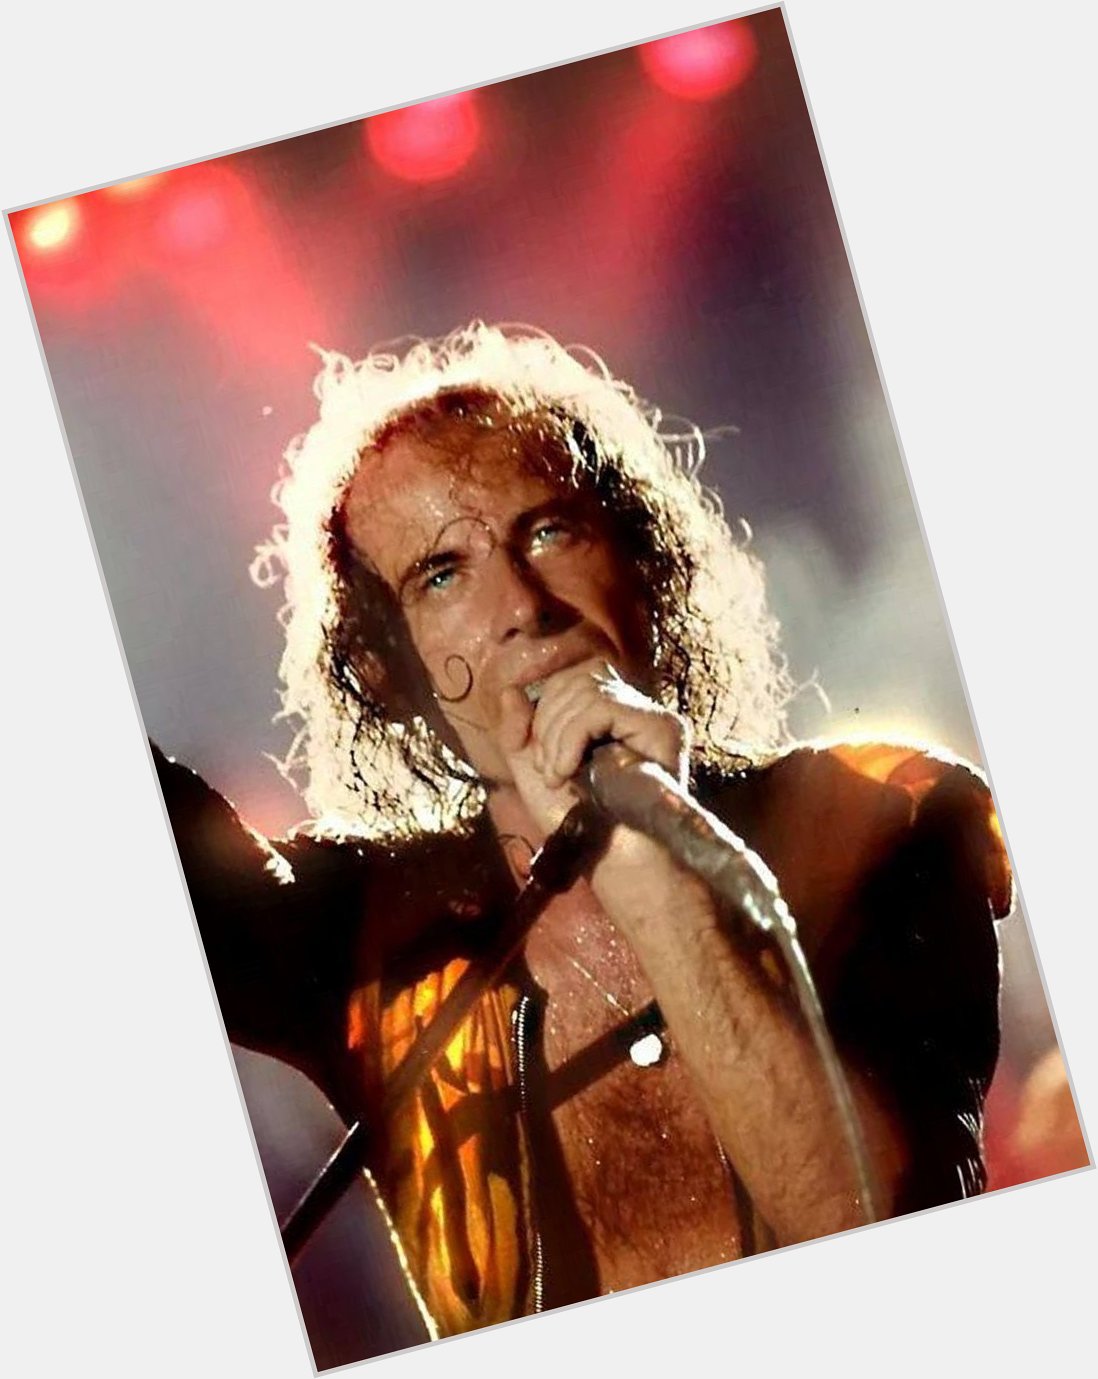 Happy 75th birthday to Klaus Meine of the 